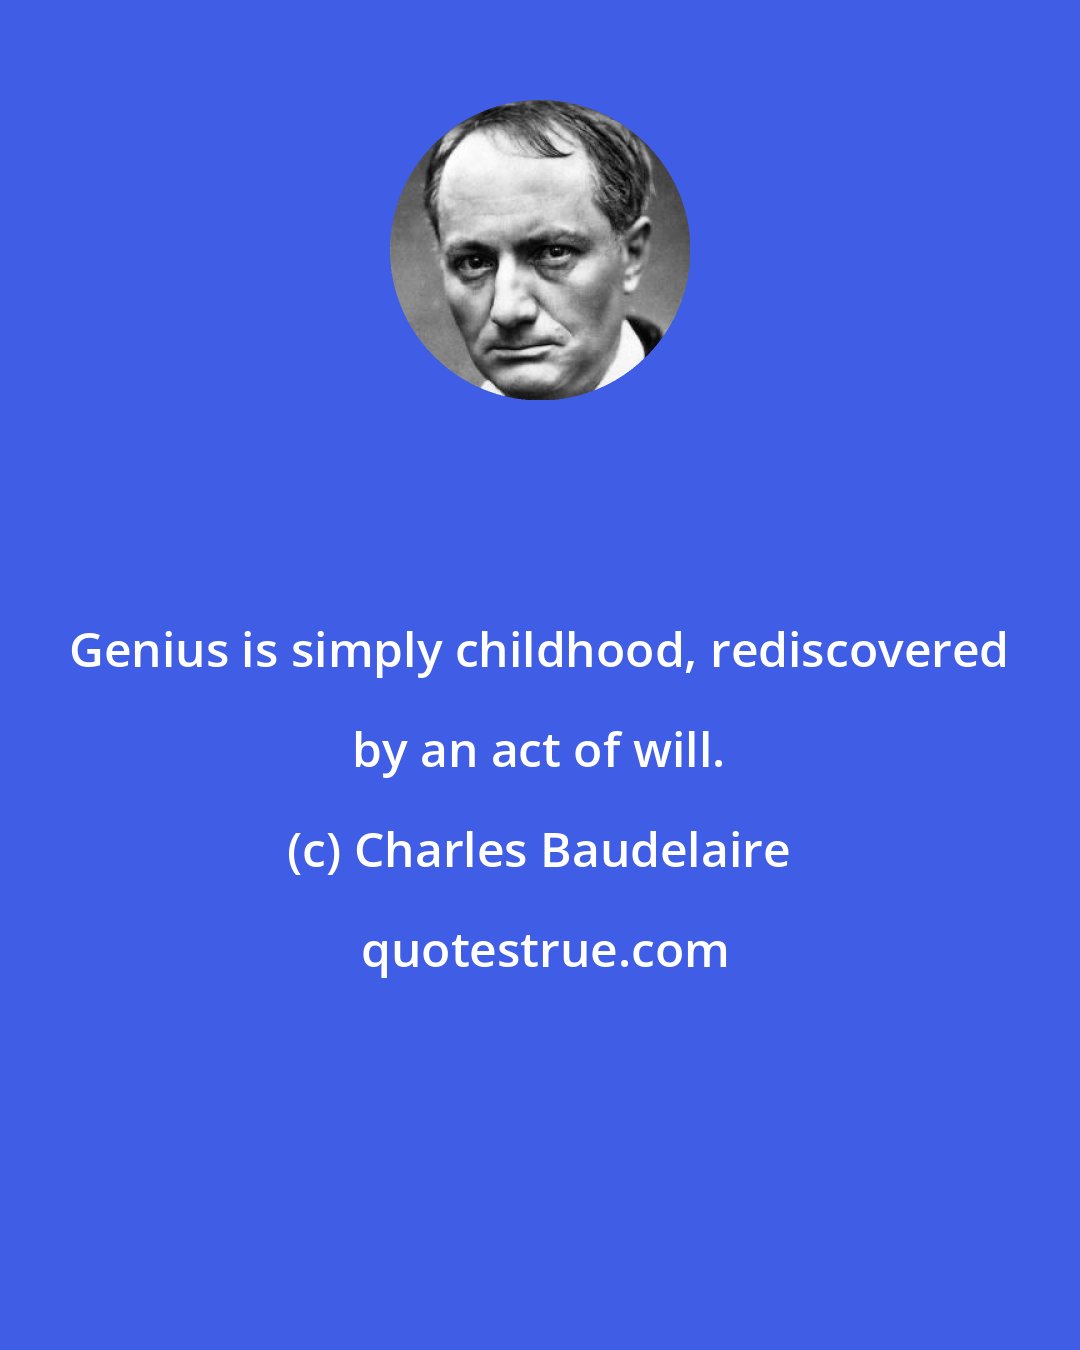 Charles Baudelaire: Genius is simply childhood, rediscovered by an act of will.